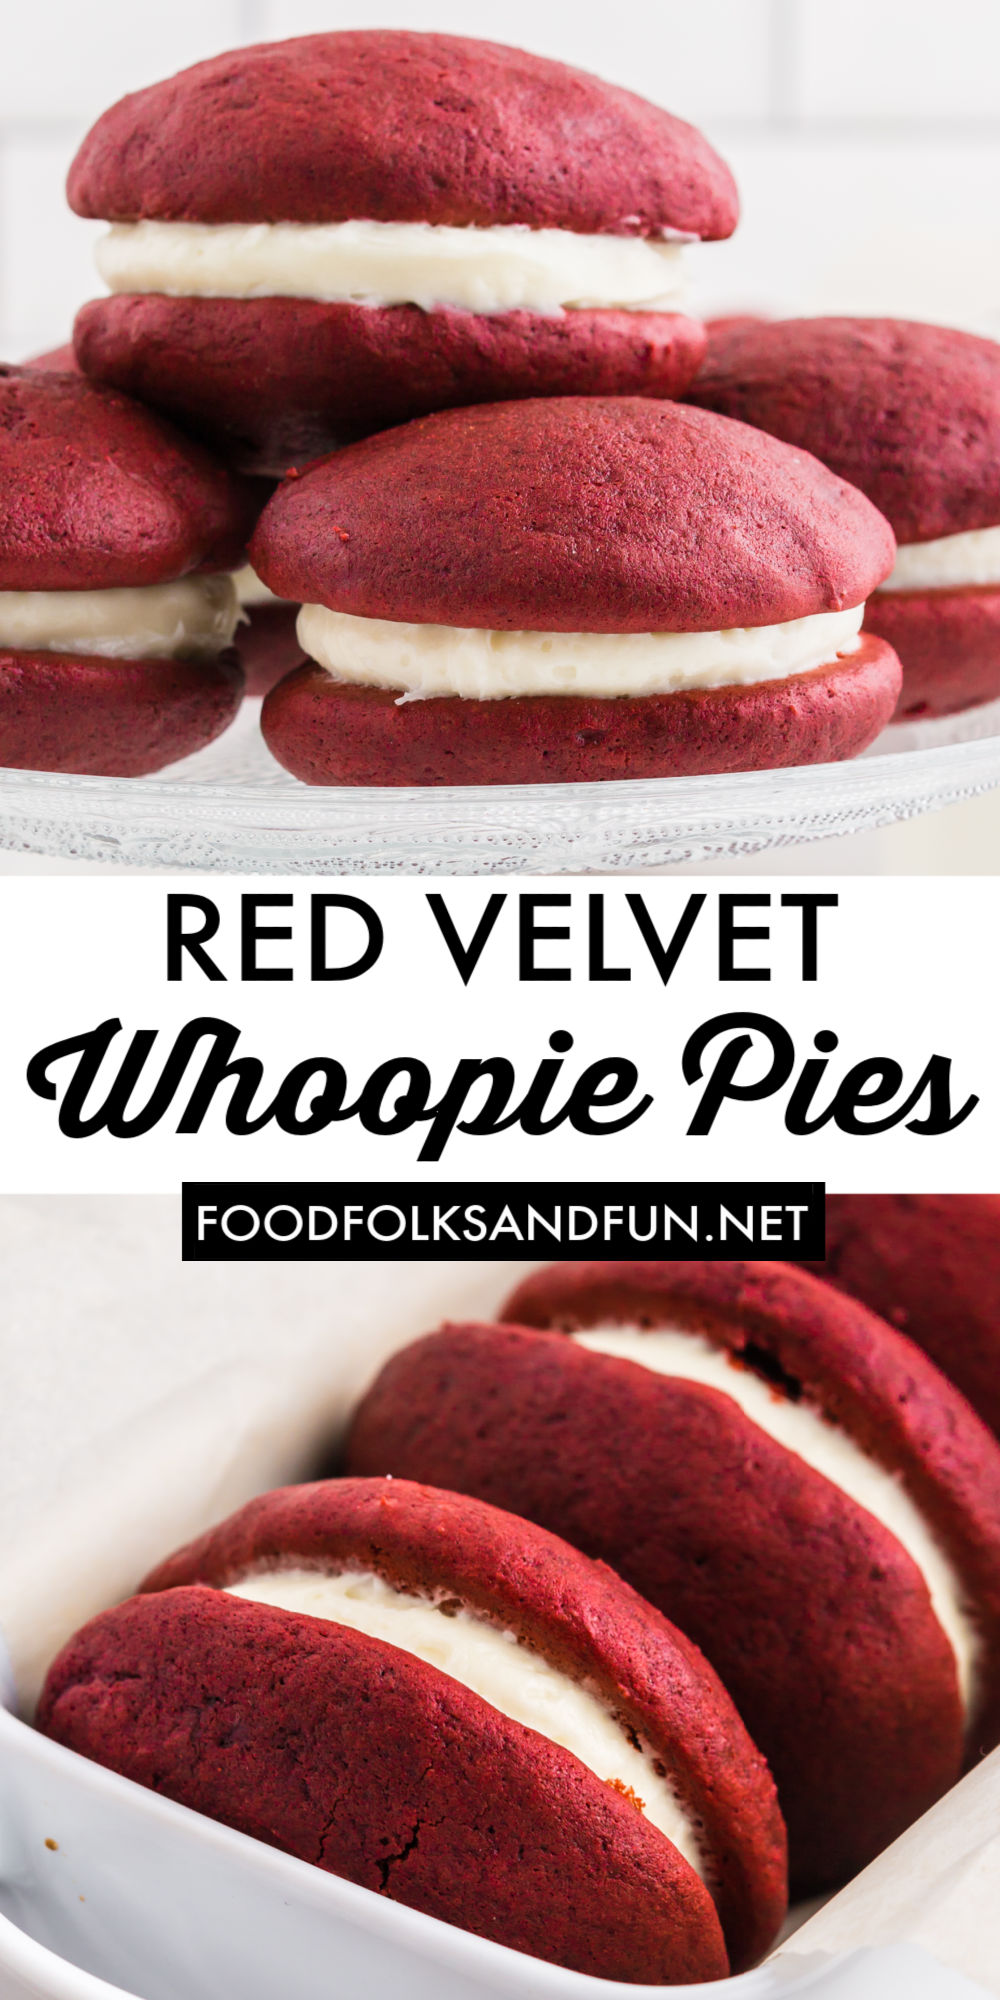 Red Velvet Whoopie Pies are two little red velvet cakes filled with a dreamy cream cheese filling. These are great for Christmas and Valentine’s Day. via @foodfolksandfun